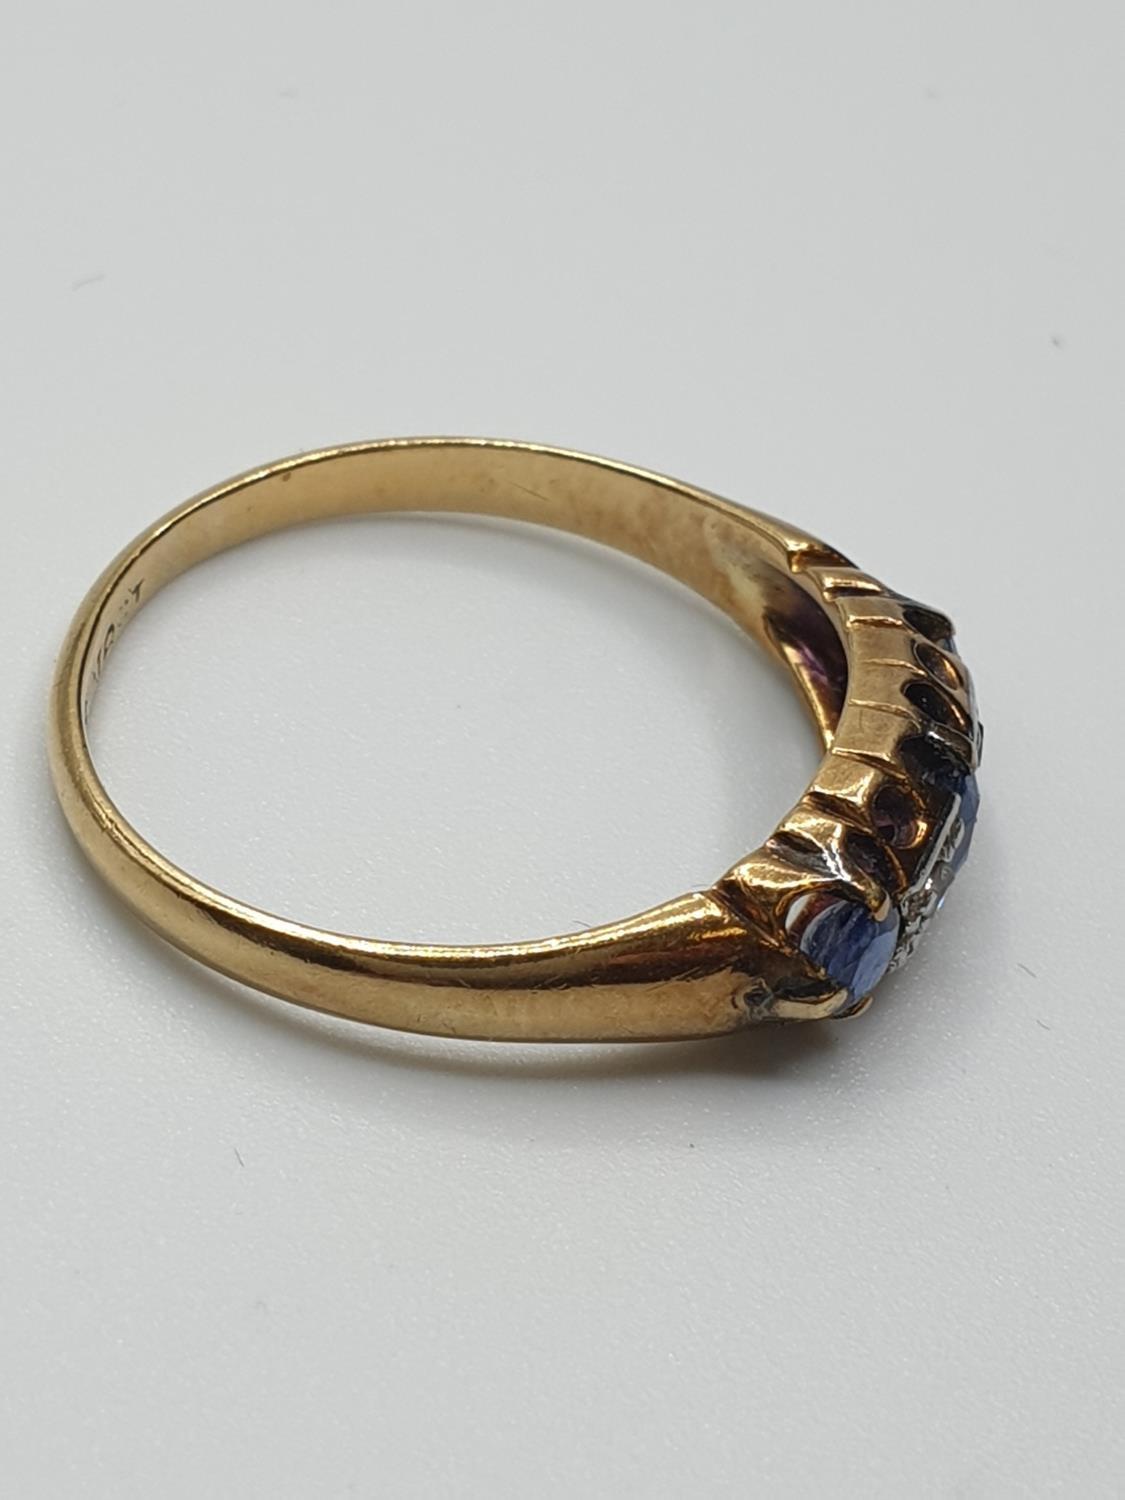 Antique 18ct Yellow Gold Diamond and Sapphire Ring, platinum mount, size M/N and weight 2g approx - Image 2 of 3